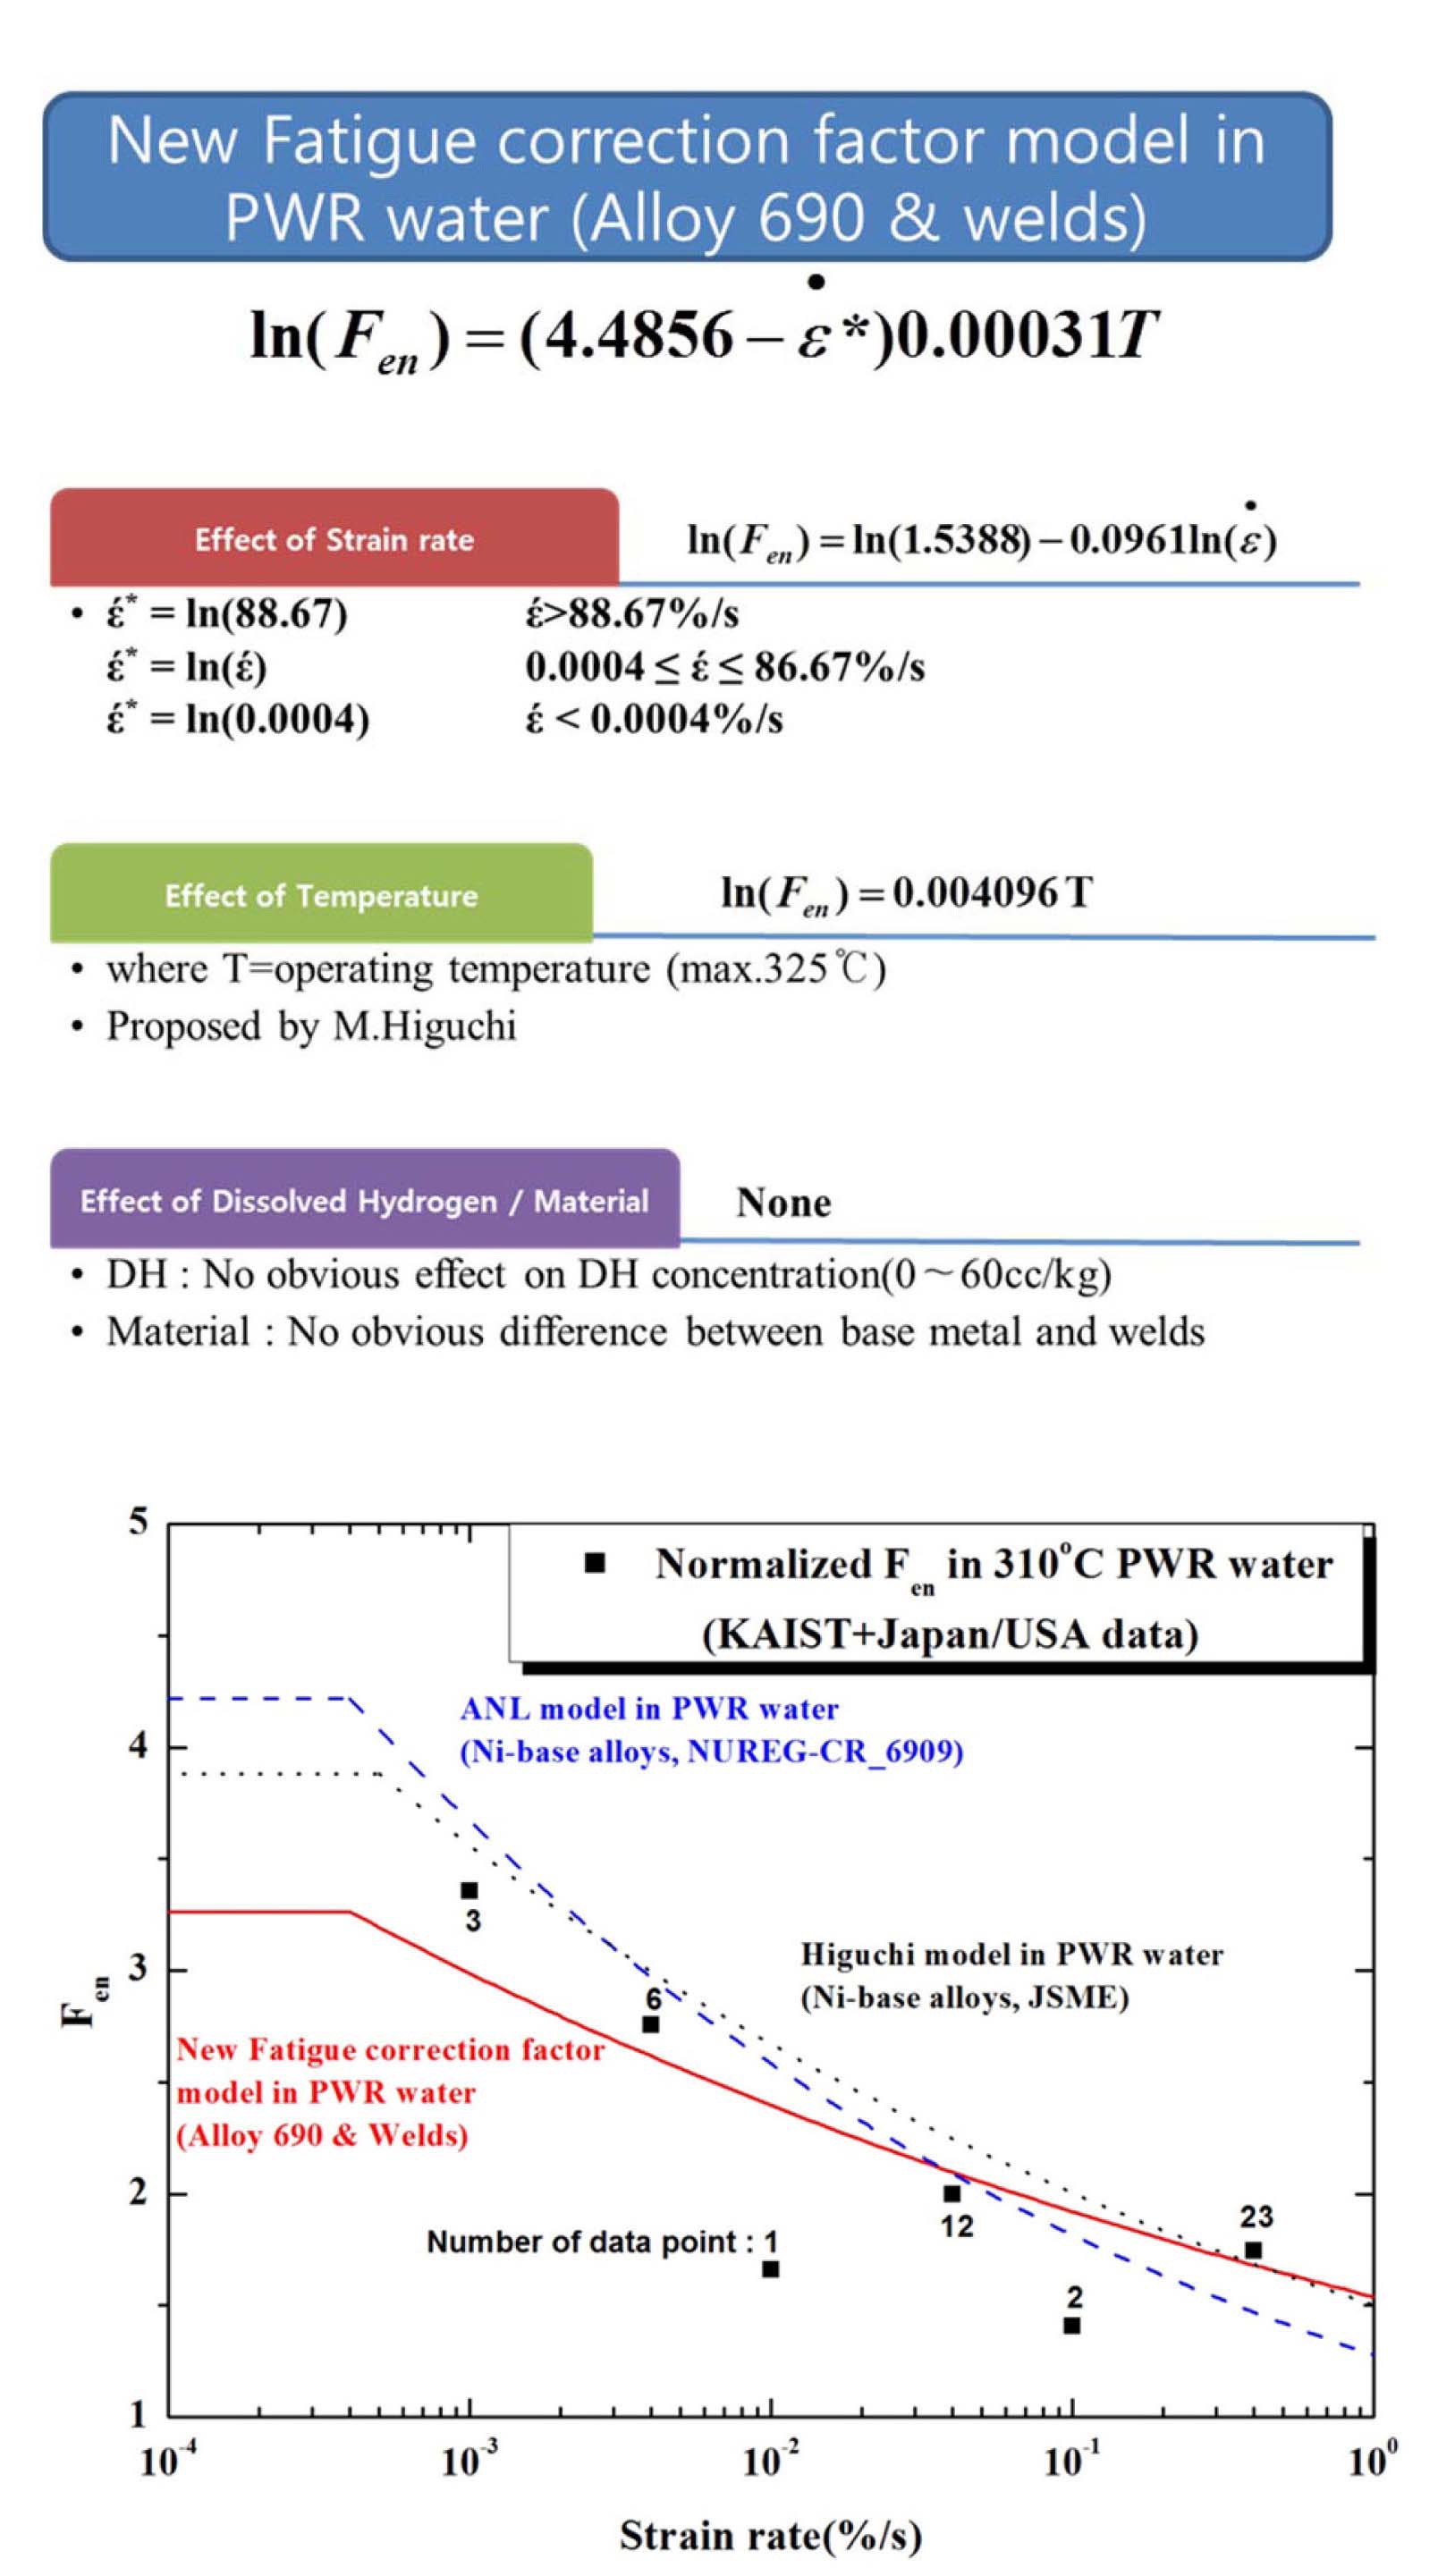 Revised Fatigue Life Correction Factor Model in PWR Water for Alloy 690 and 52M weld [25]. Number of Data Points is Shown on the Measured Fen Data.